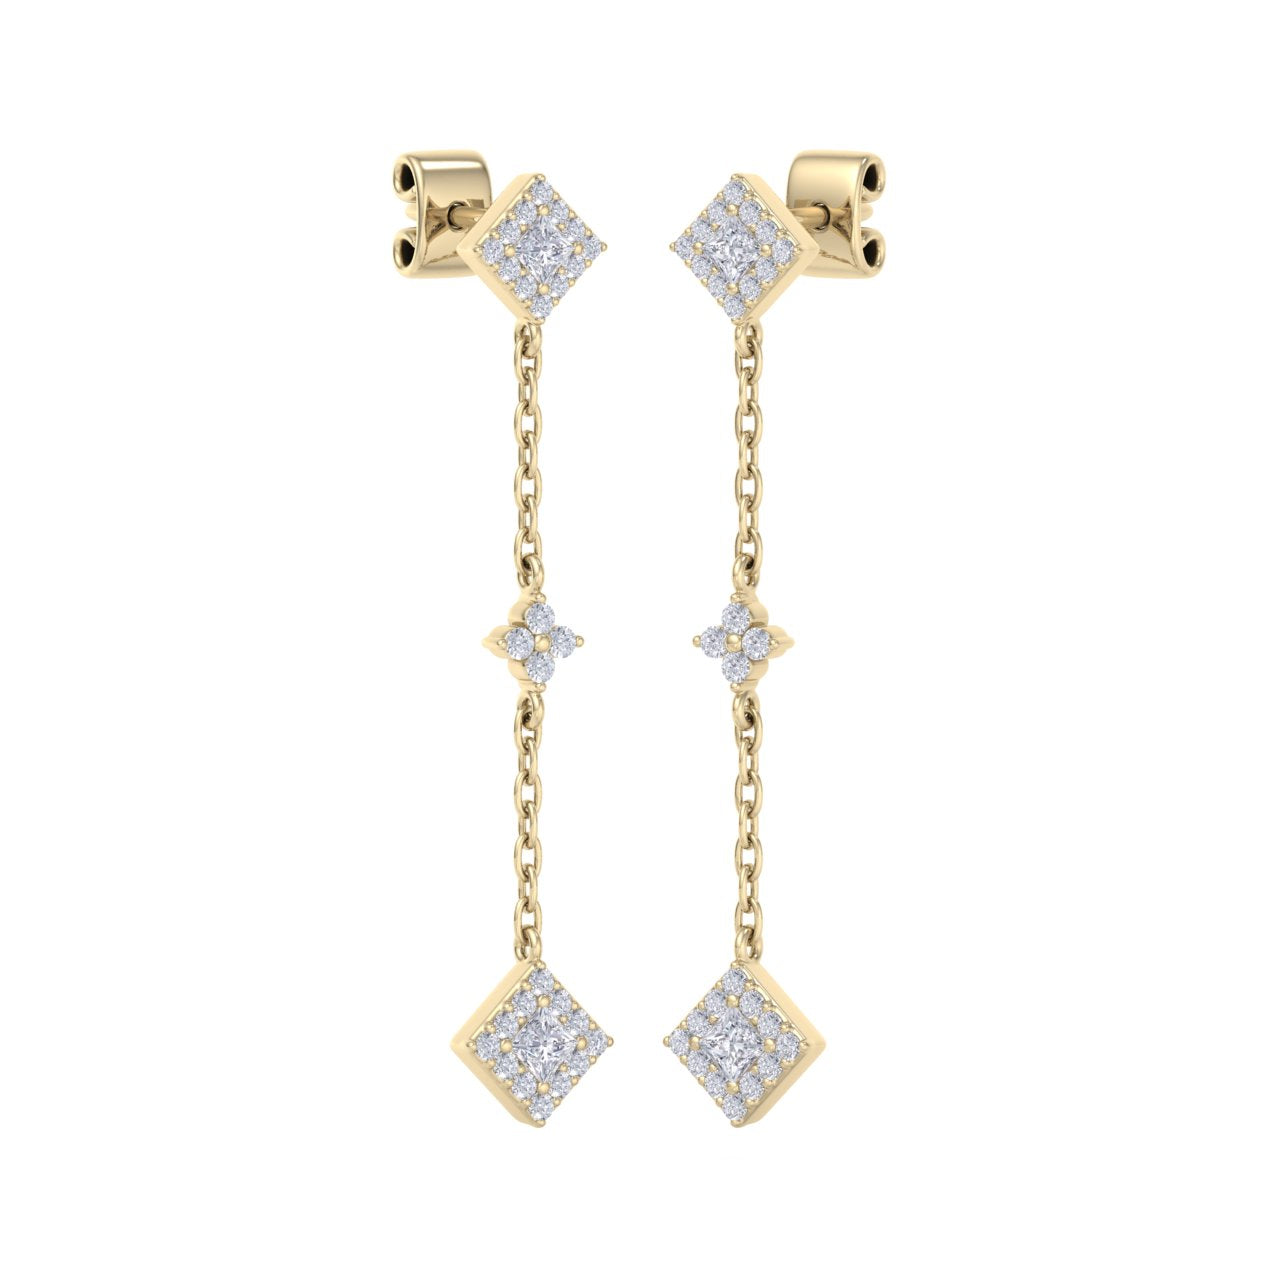 Drop earrings in rose gold with white diamonds of 0.53 ct in weight